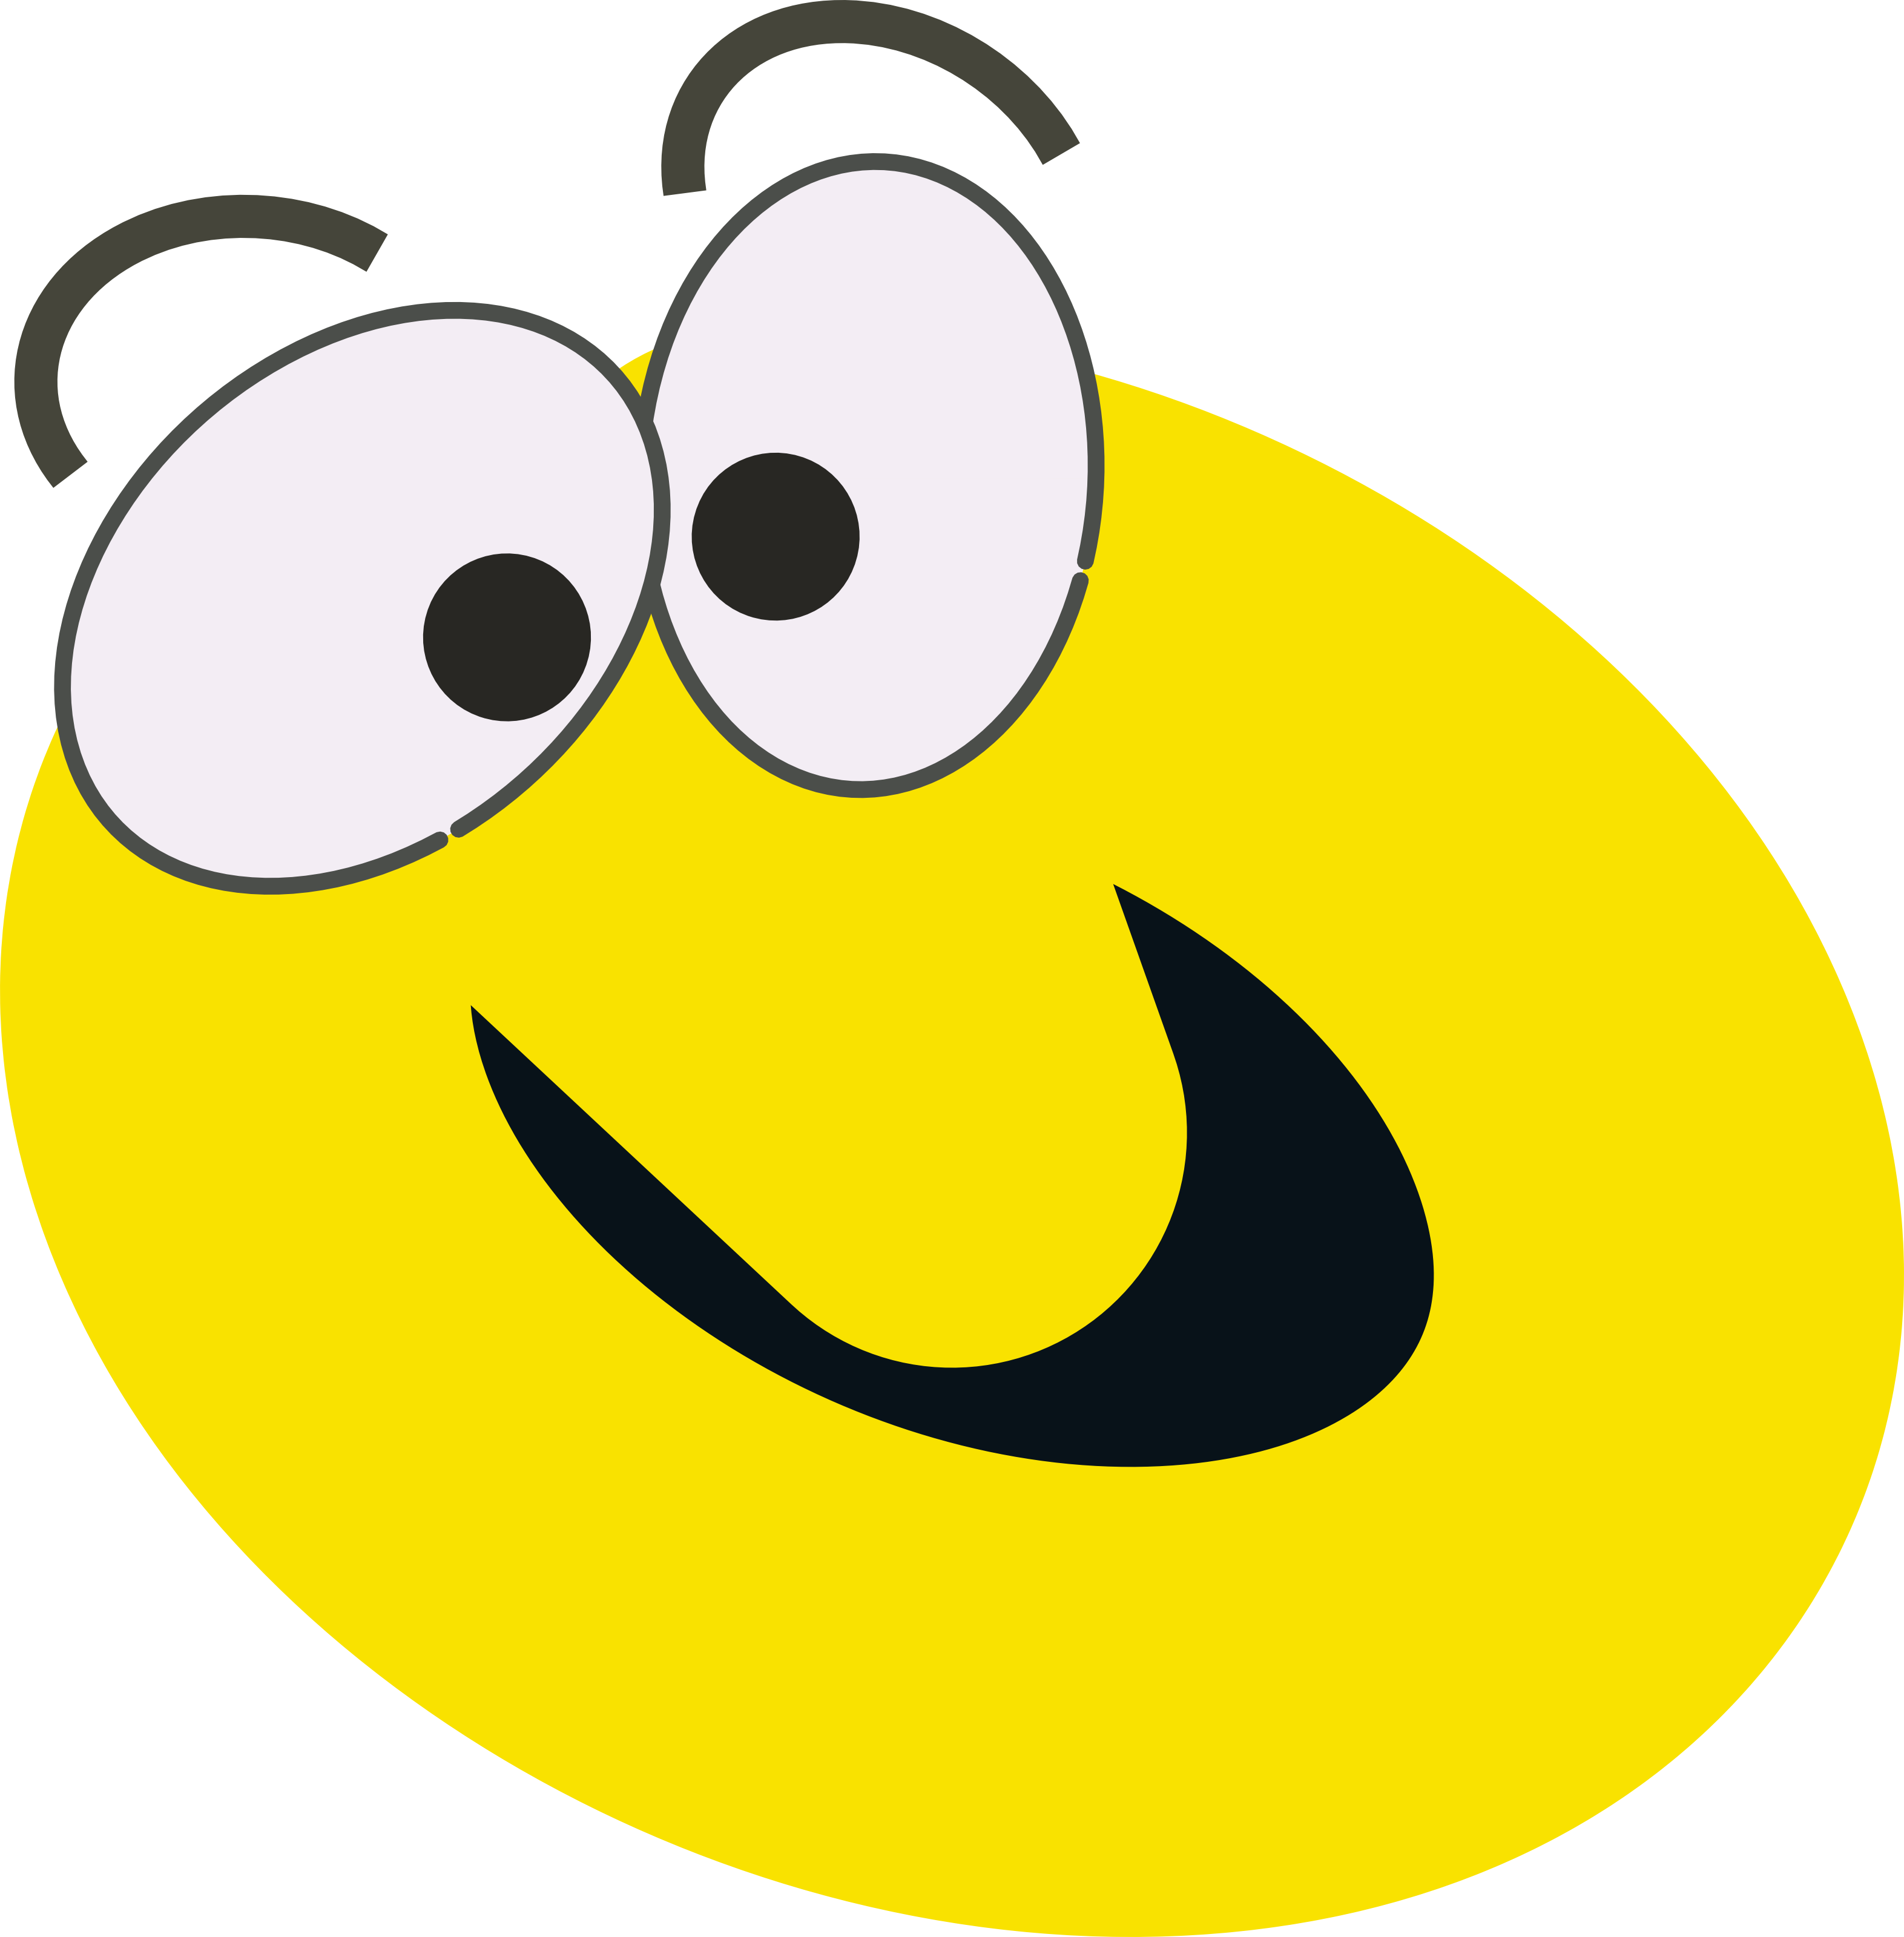 Smiley face clip art animated .